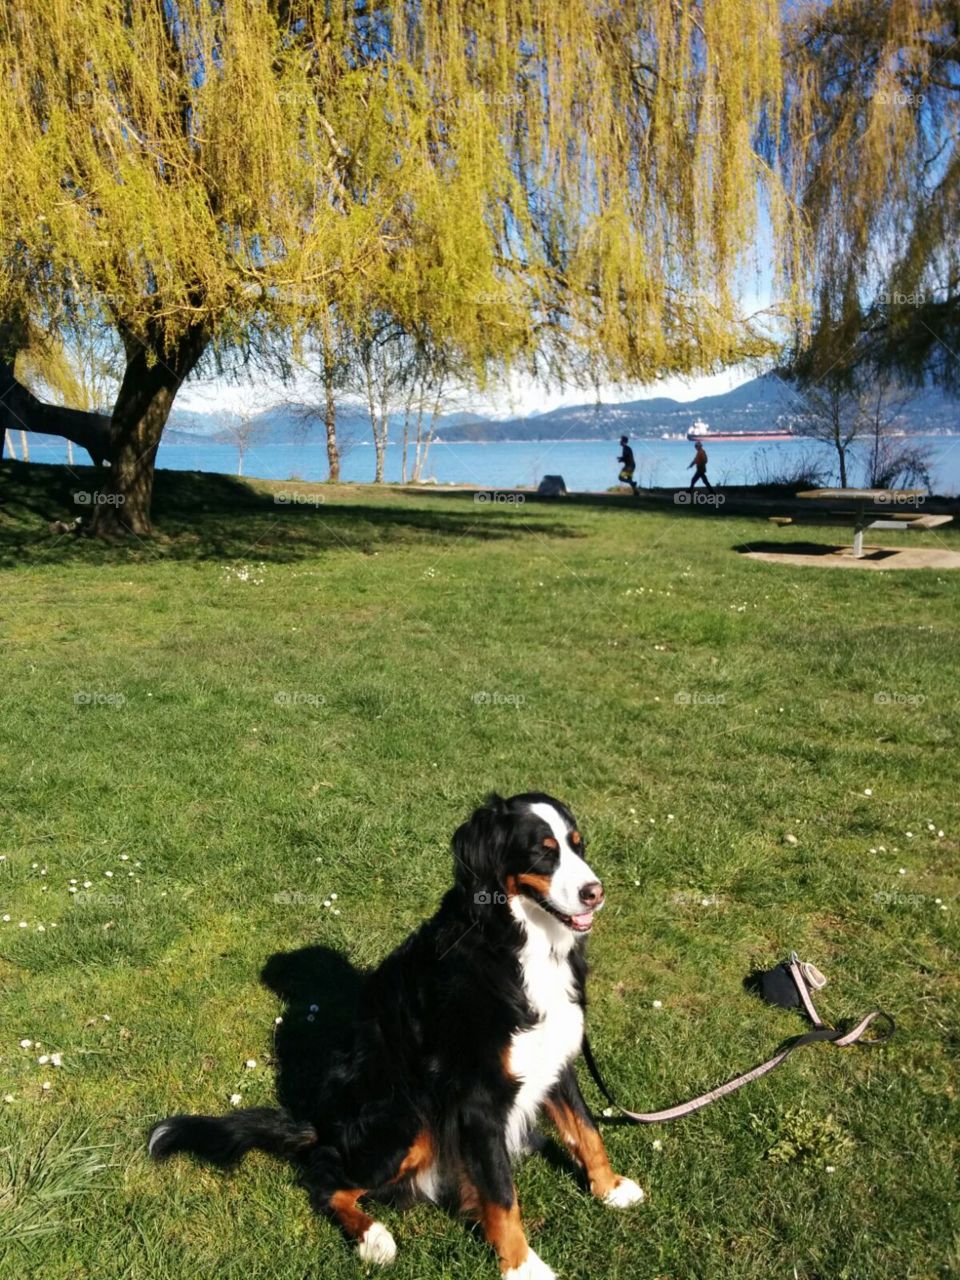 Bernese Mountain dog, Cassie, takes us on a tour along Jericho Beach during the summer in Vancouver, British Columbia.